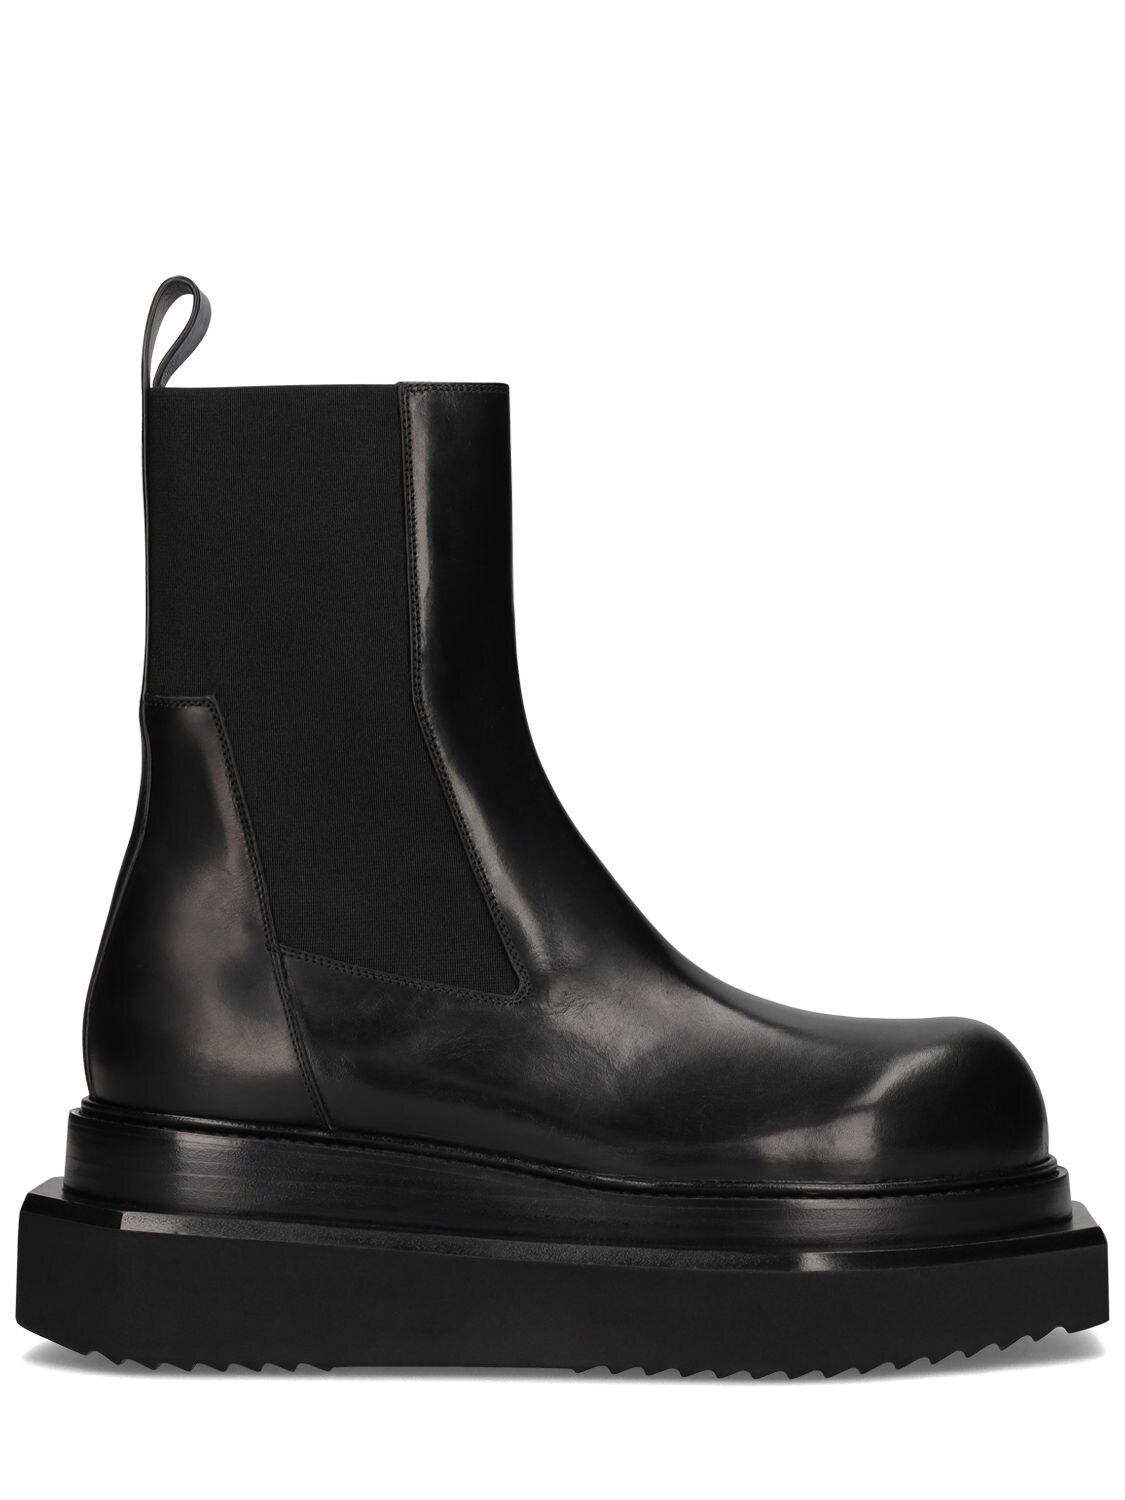 Rick Owens Beatle Turbo Cyclops Leather Boots in Black for Men | Lyst